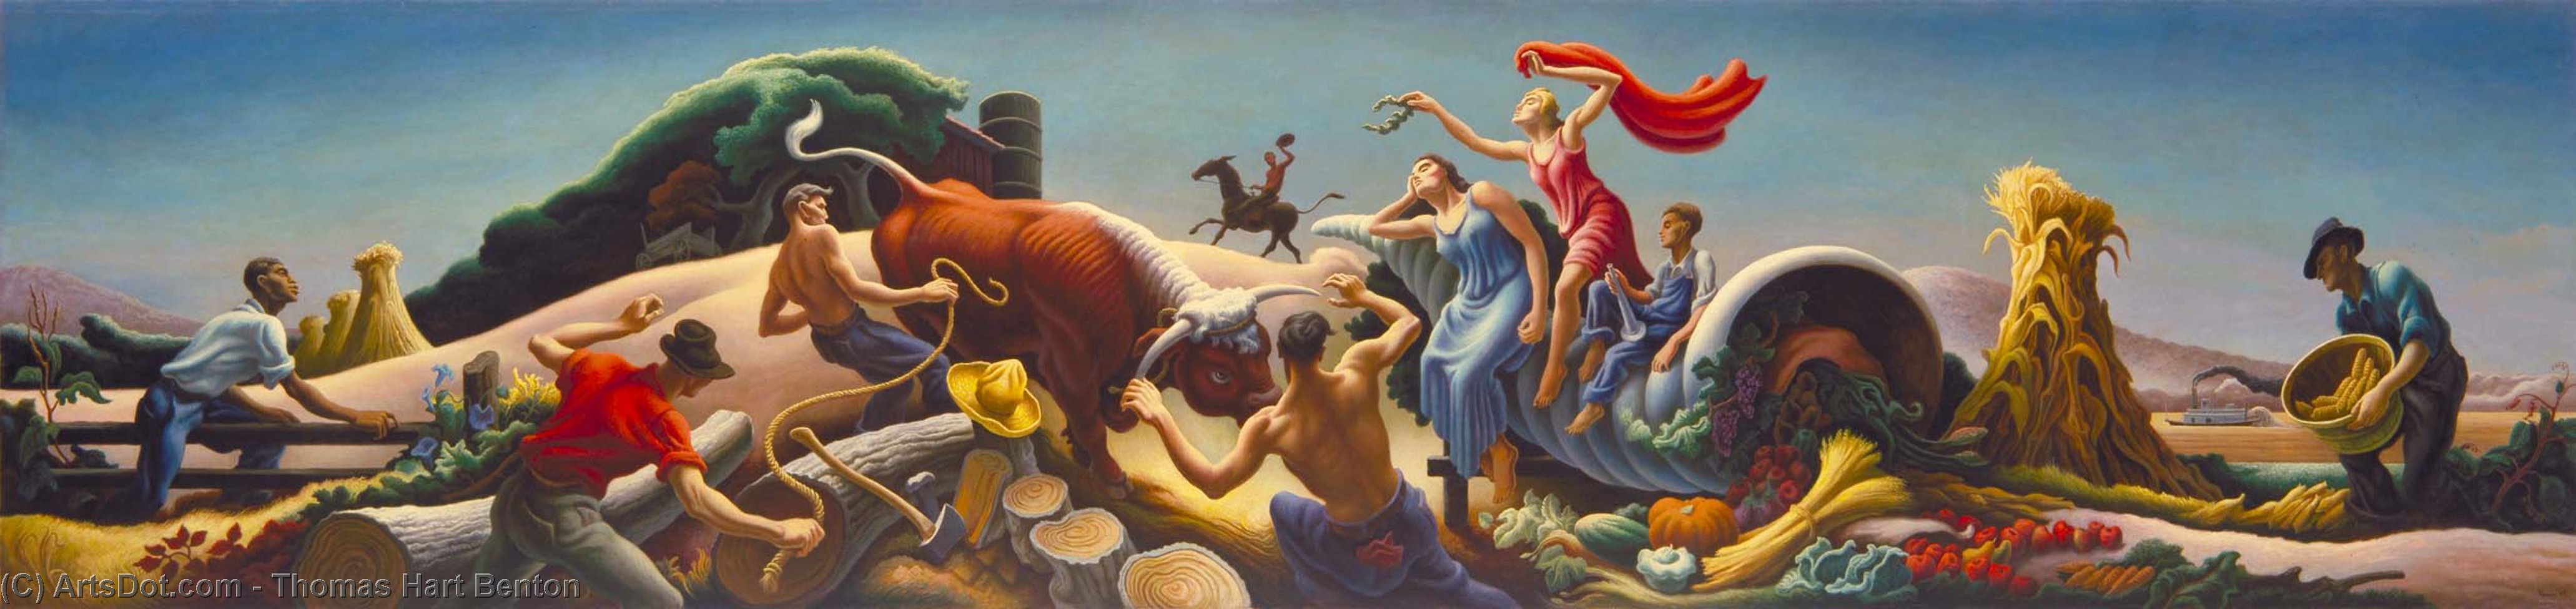 Order Paintings Reproductions Achelous and Hercules, 1947 by Thomas Hart Benton (Inspired By) (1889-1975, United States) | ArtsDot.com